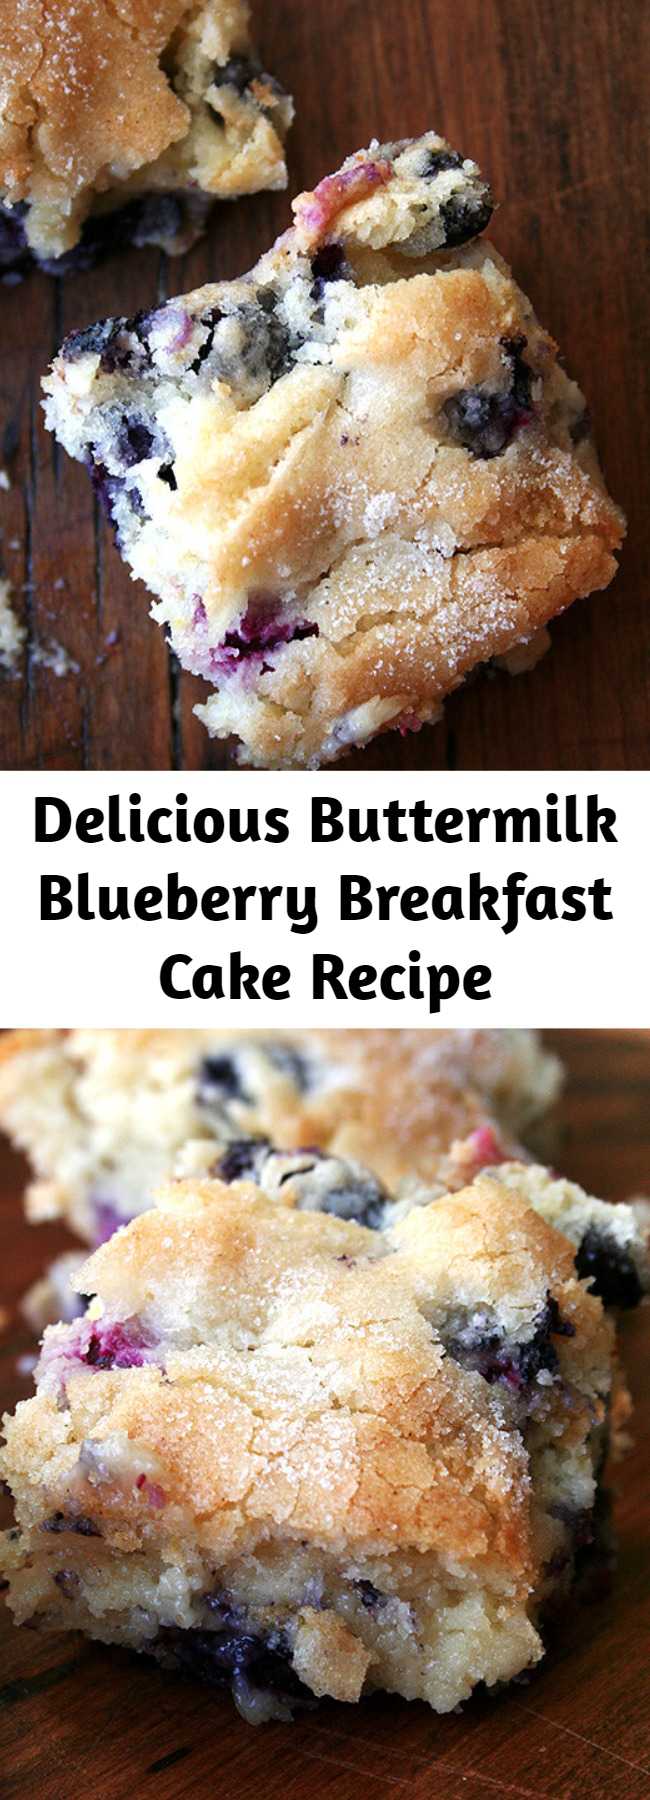 Delicious Buttermilk Blueberry Breakfast Cake Recipe - If you’re looking for a delicious, seasonal, berry cake recipe to add to your morning-treat repertoire, this buttermilk blueberry breakfast cake is perfect! The batter can be made ahead of time and stashed in the fridge, allowing you to bake the cake off in the morning. What’s more? It freezes beautifully!